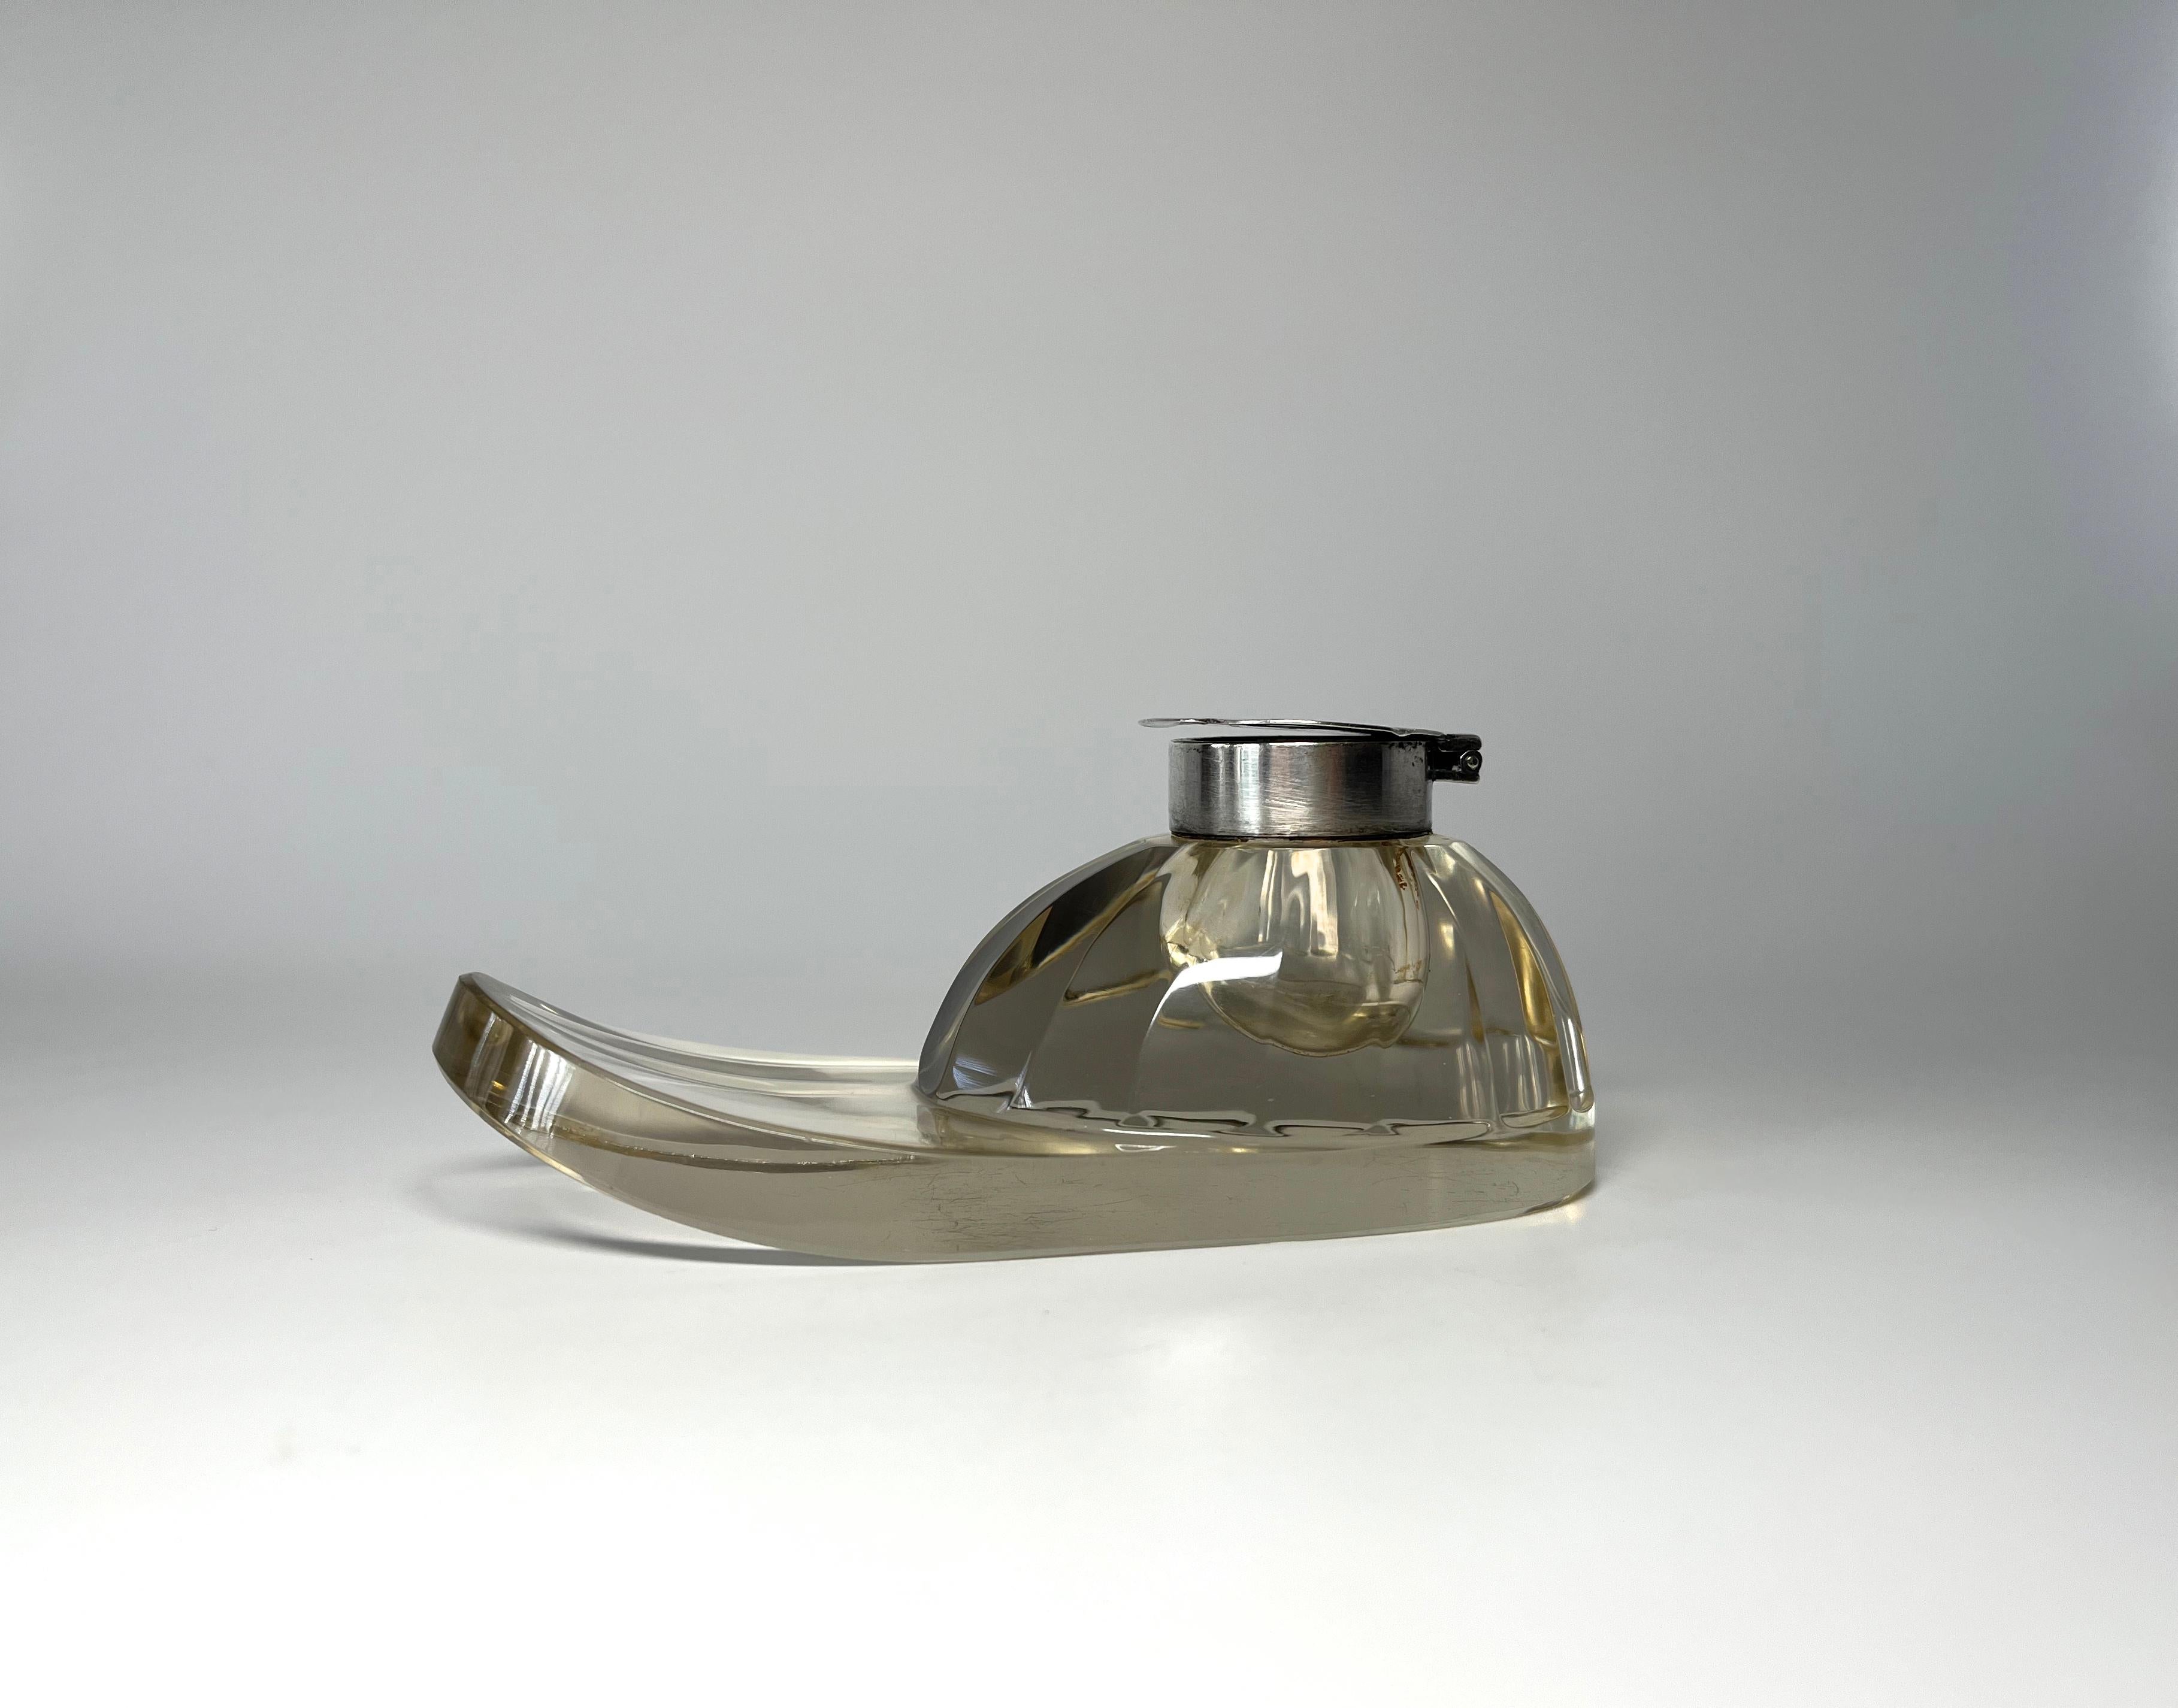 Edwardian cut glass jockey cap inkwell by Hukin & Heath, mounted on a hallmarked English silver collar.
Hinged collar with hallmark and engraved monogram cover
Hallmarked Birmingham 1908
Unusual and immensely collectible 
Length 5.5 inch, Height